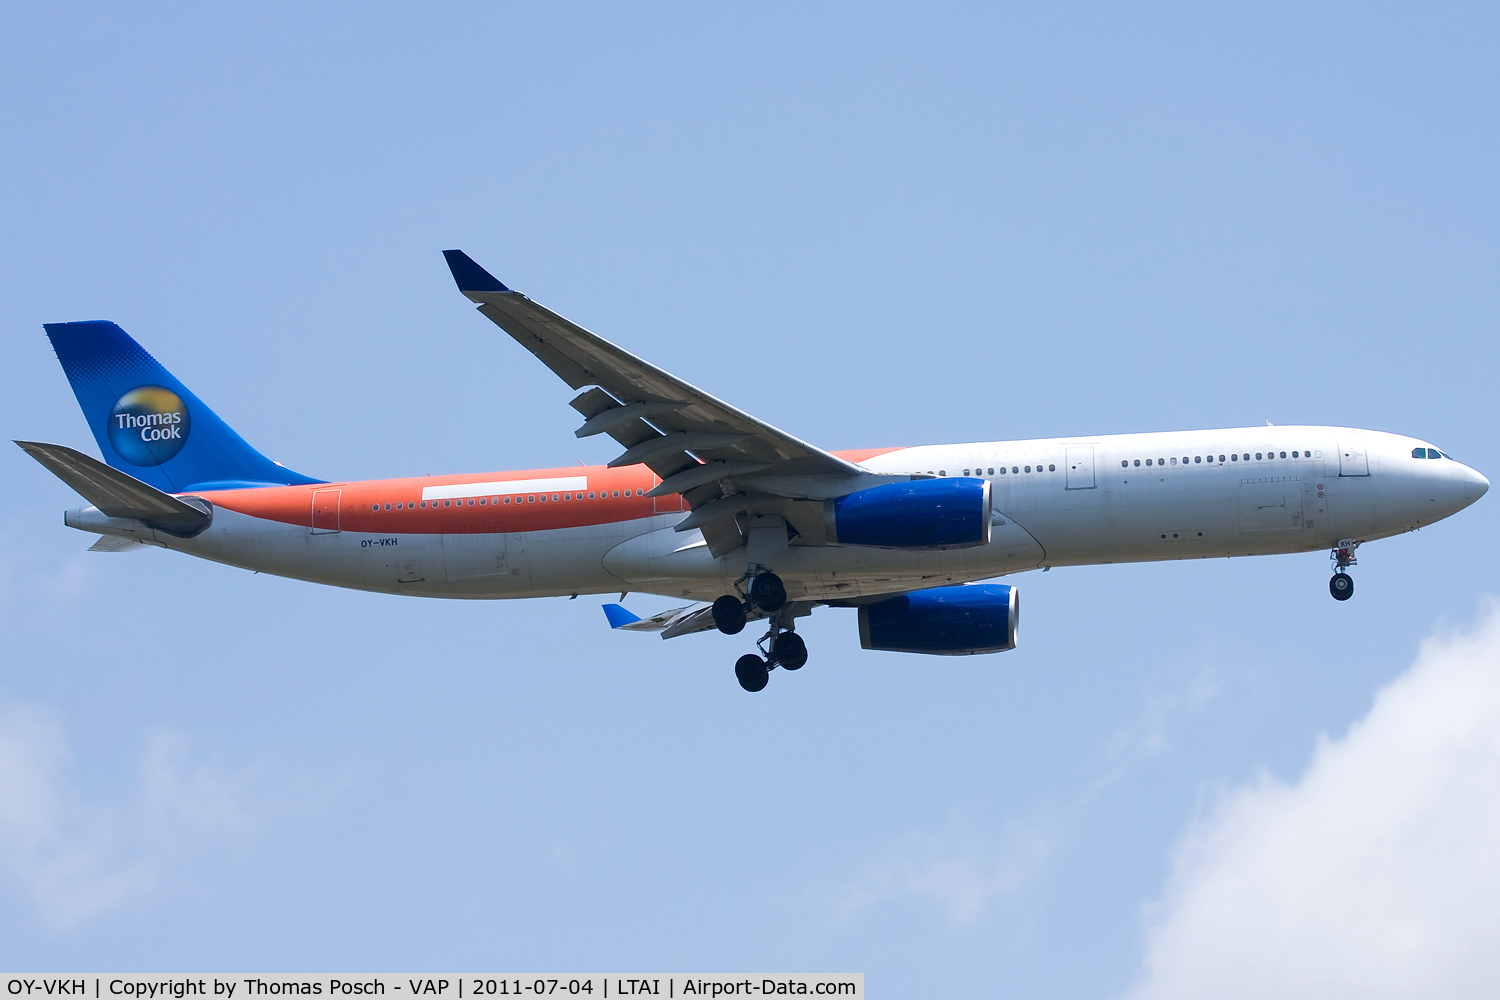 OY-VKH, 2000 Airbus A330-343X C/N 356, Thomas Cook Airlines (Scandinavia)